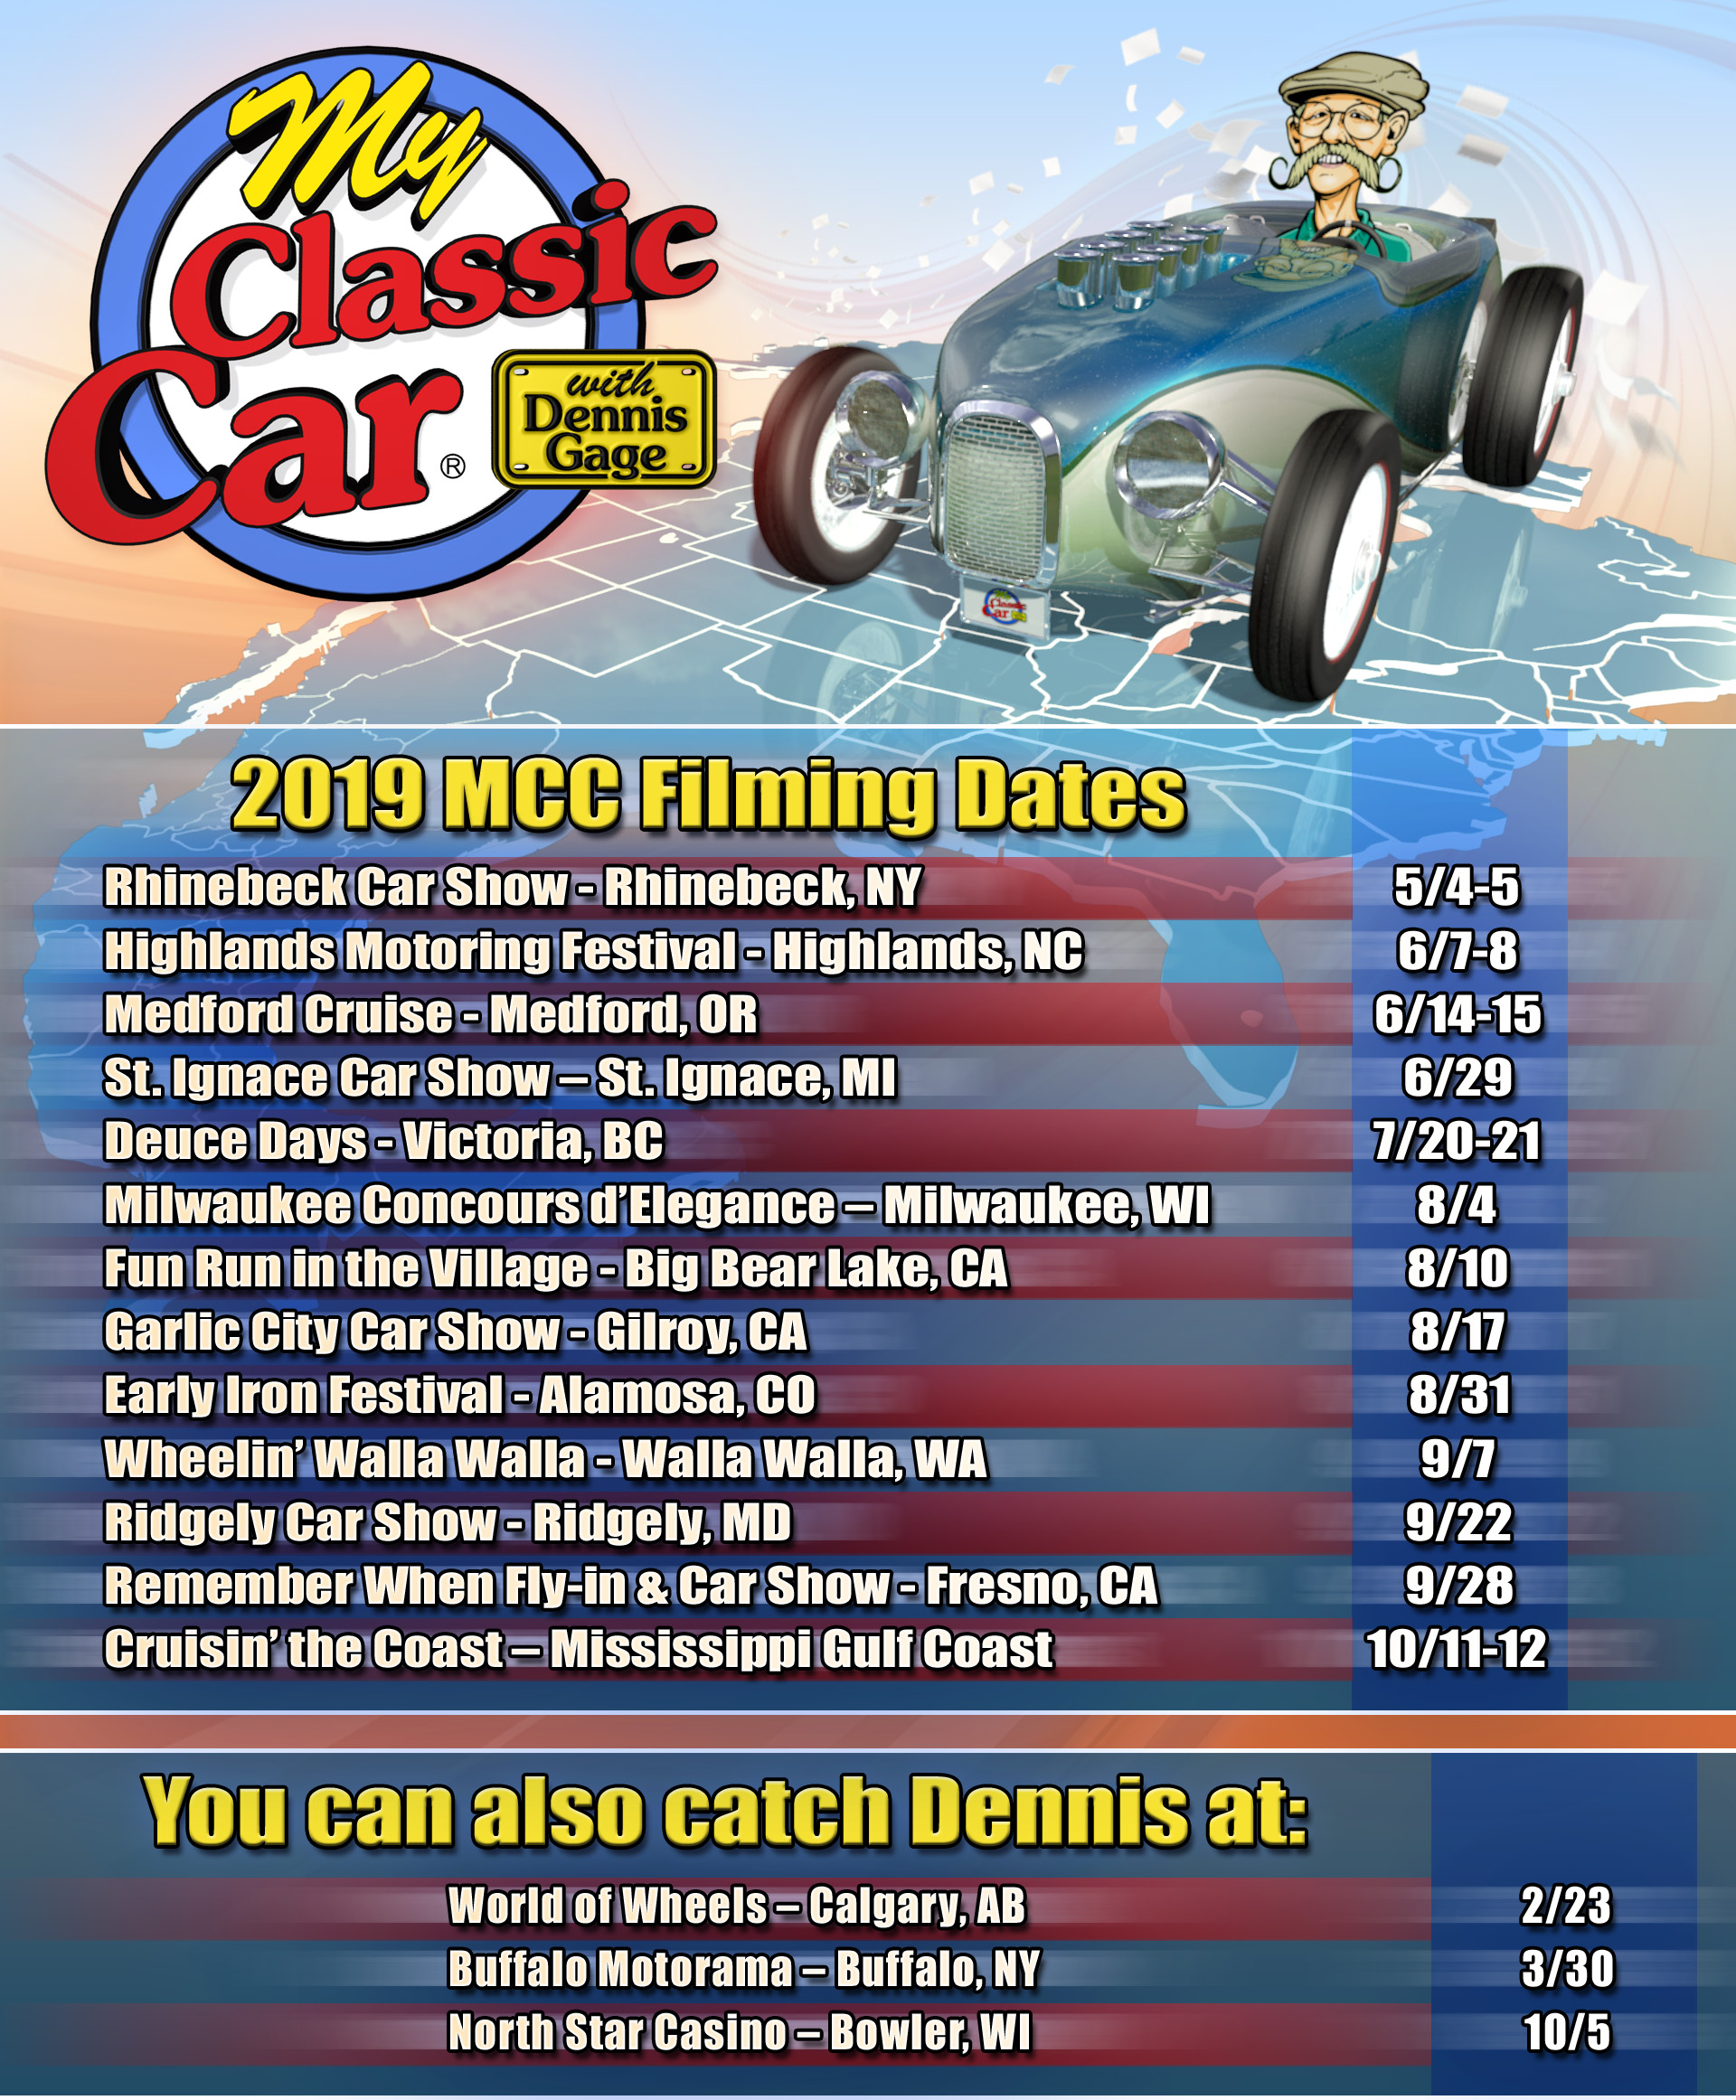 Production Schedule My Classic Car with Dennis Gage